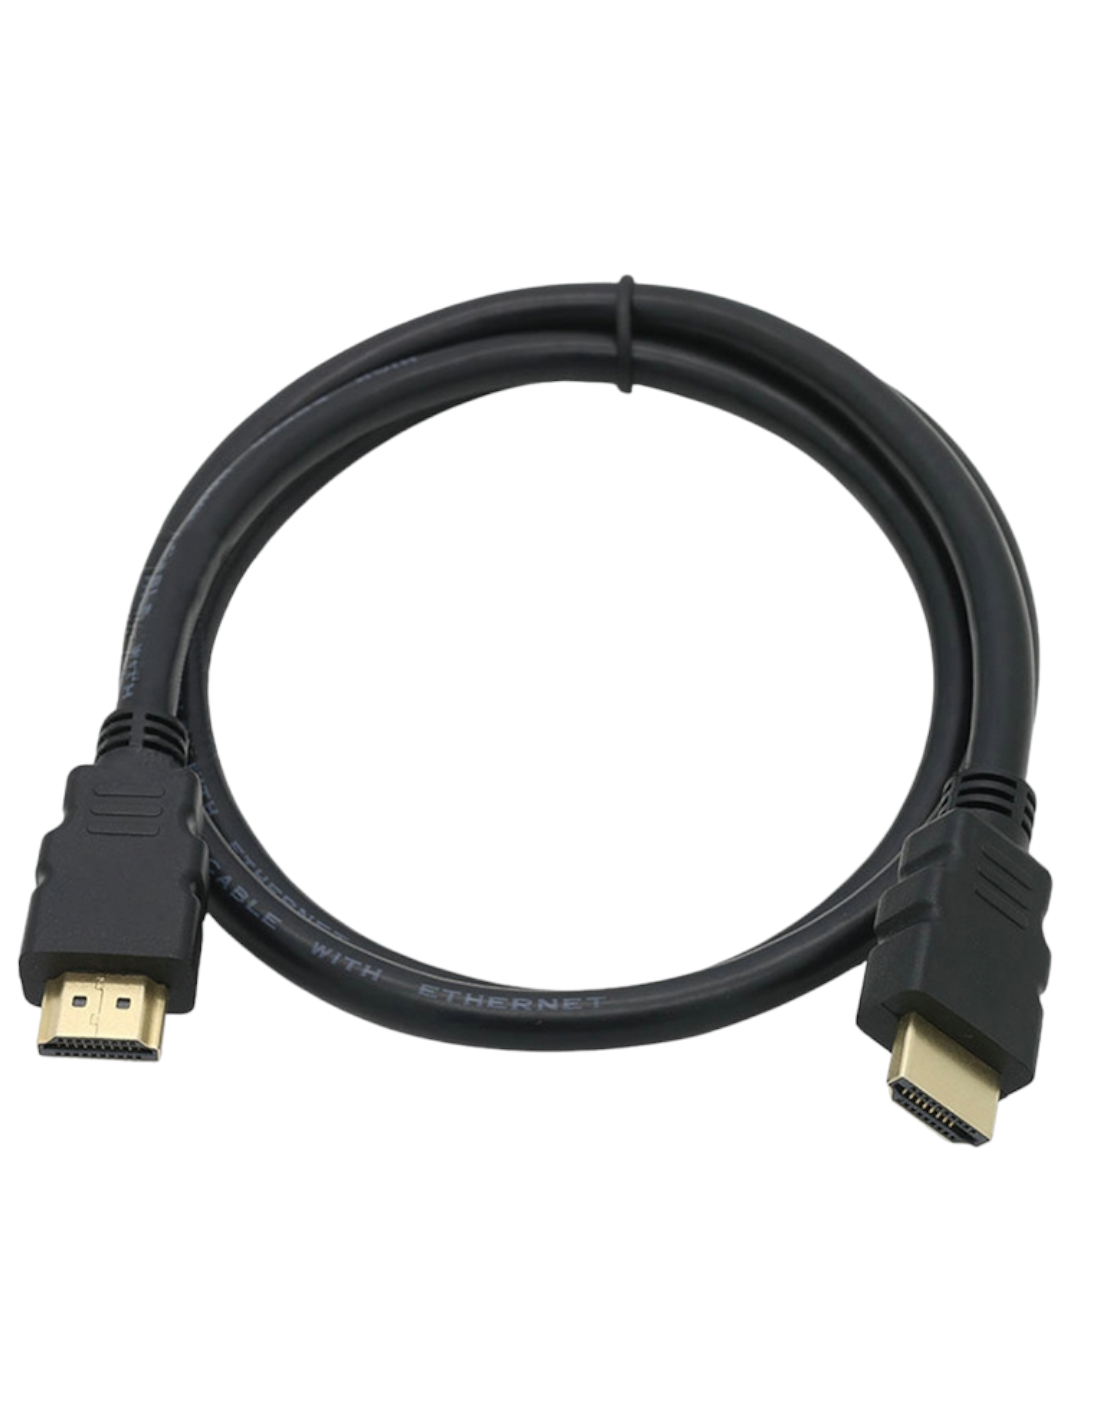 GIO - Cable Hdmi 5 Metros Full Hd 1080p Ps4 Xbox Laptop Pc Tv